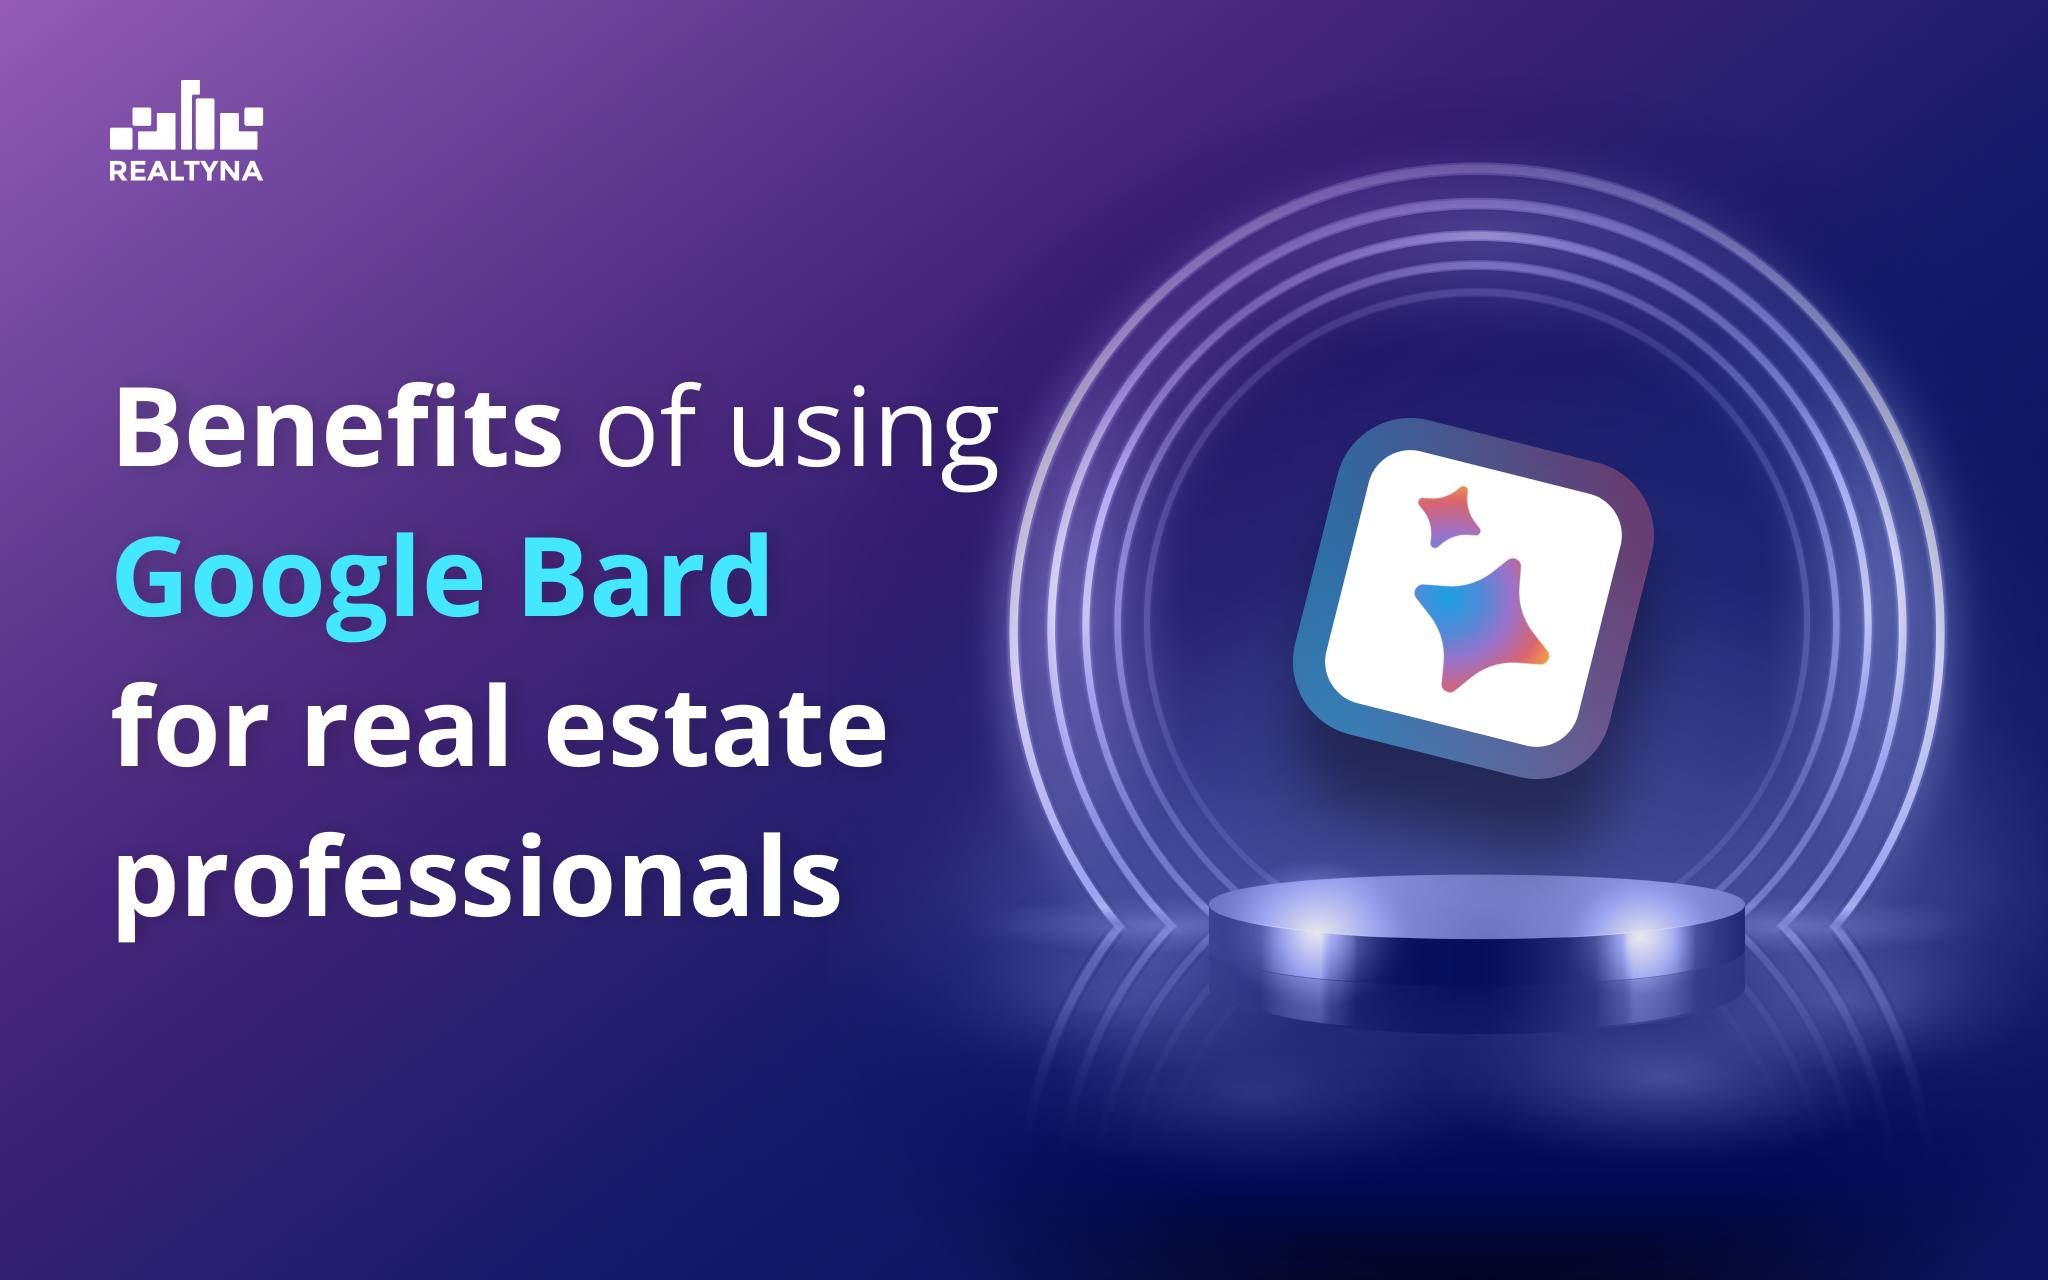 Benefits of using Google Bard for real estate professionals